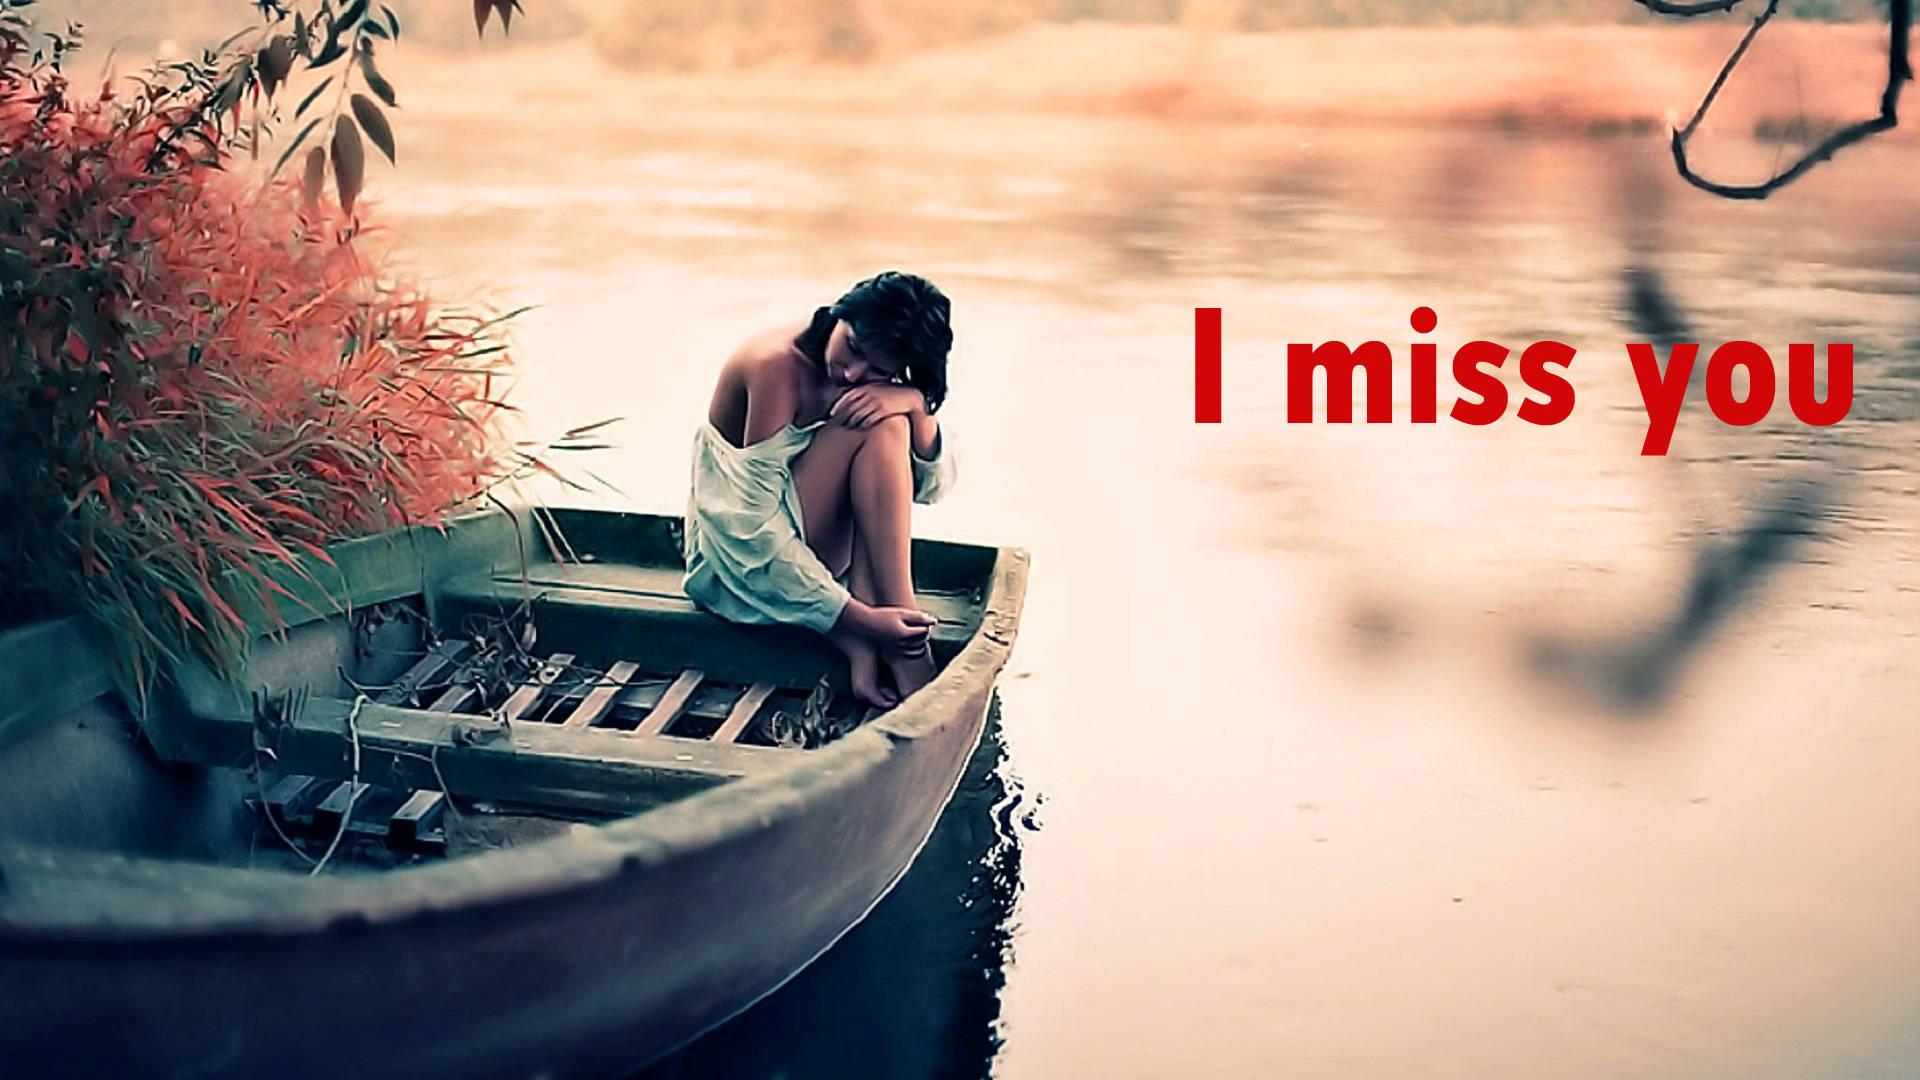 Free I Miss You Wallpaper Downloads, [100+] I Miss You Wallpapers for FREE  